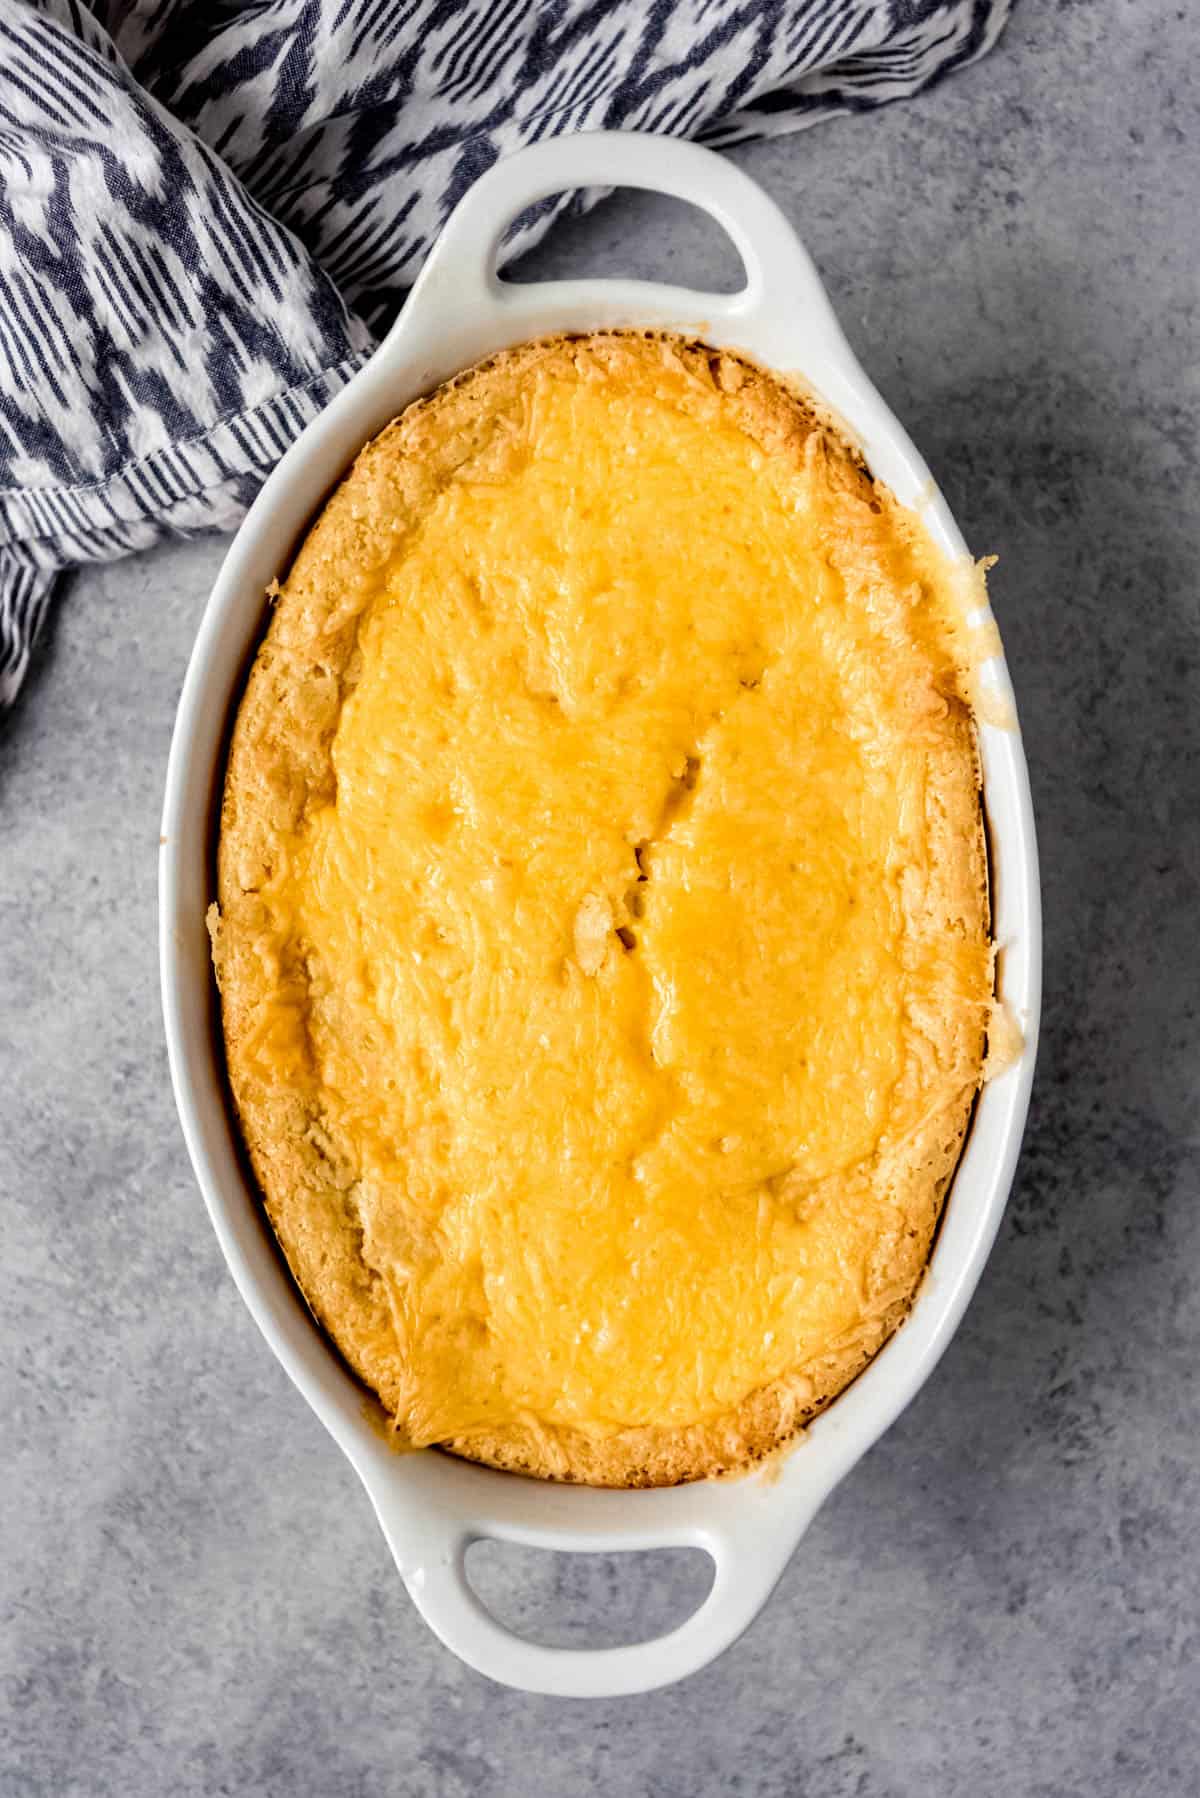 An Image of Baked Corn Casserole in an oval baking dish.